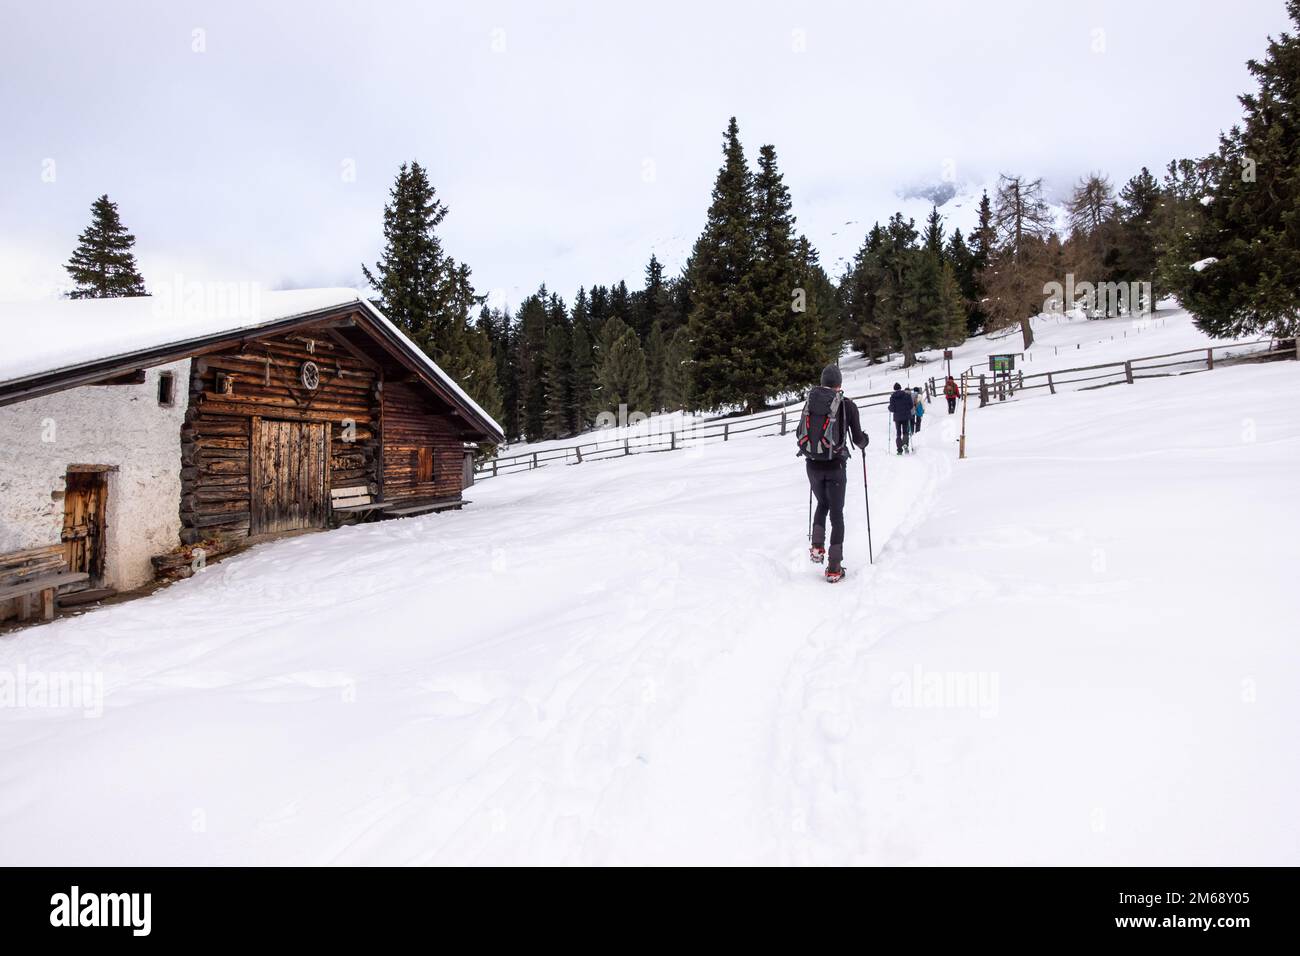 Winter snow mountain hiking group of tourists in the mountains, in the Alps. Group of people walking with hiking poles on the snow near a wooden hut Stock Photo